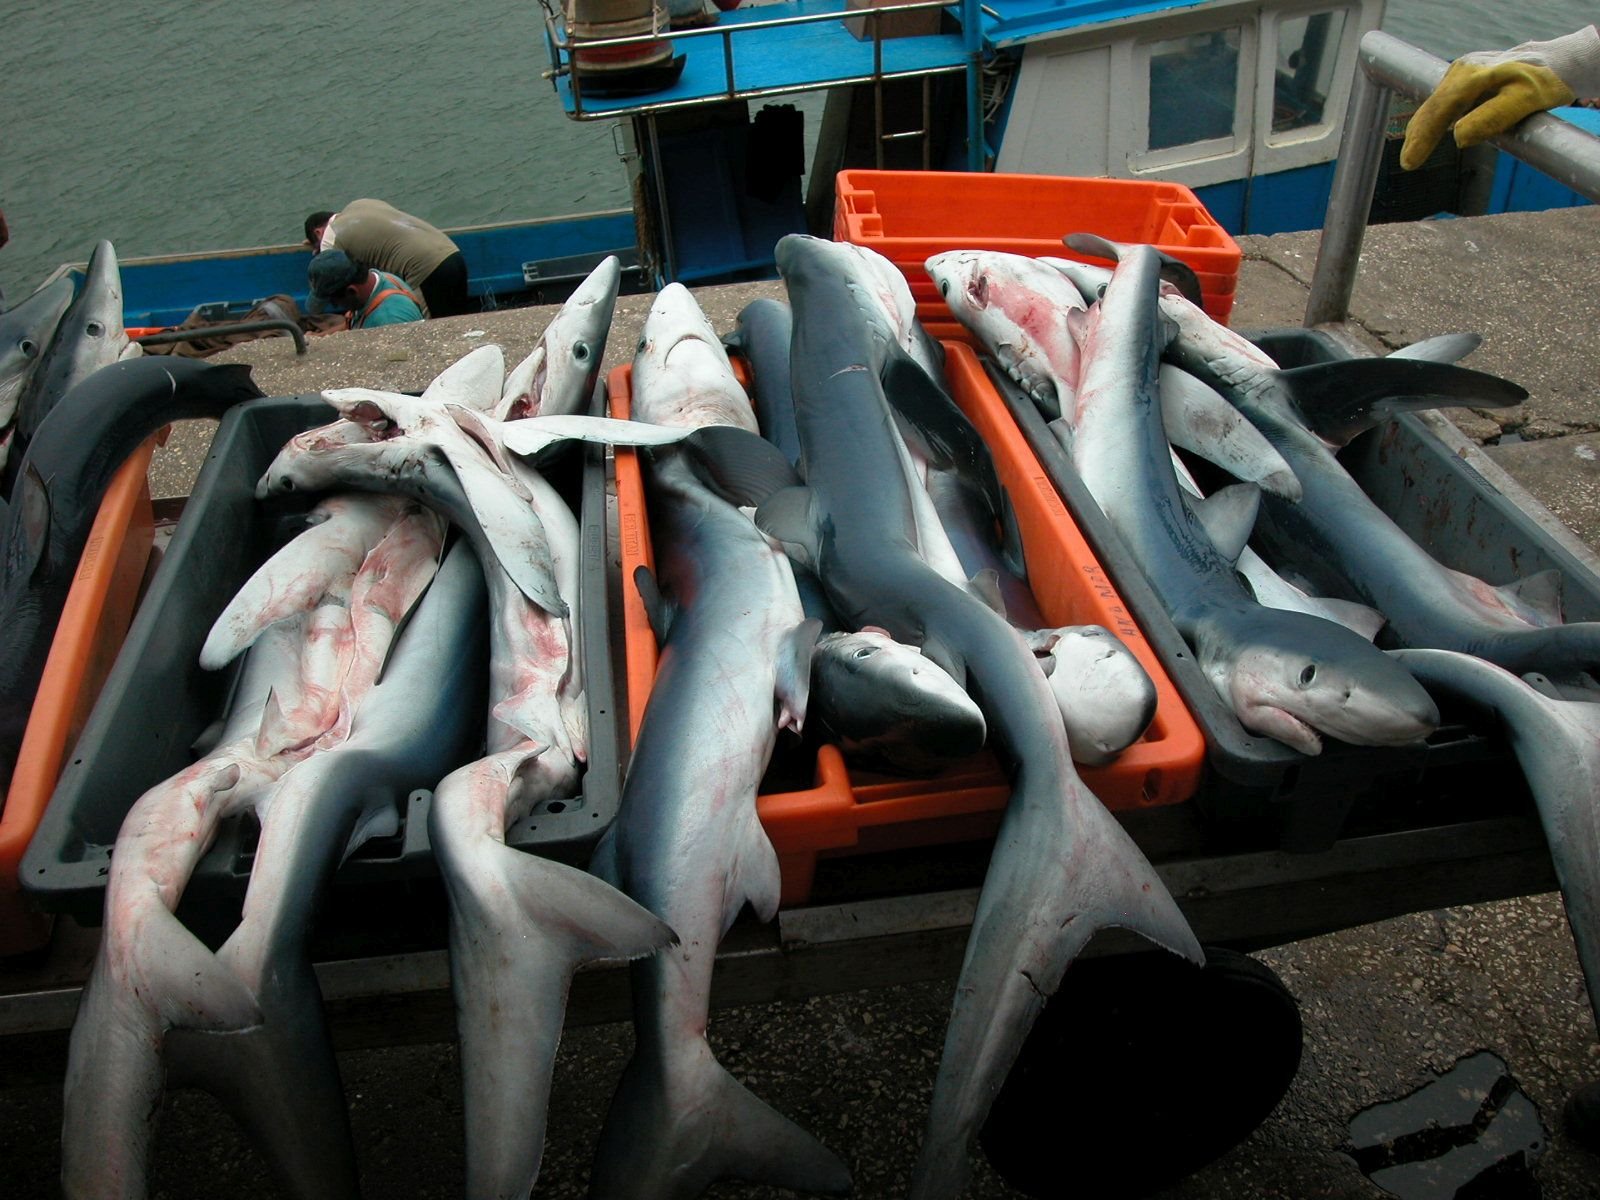 Sharks and rays “migrate” more when they are dead than alive, as their meat crosses over 200 borders, with some Mediterranean and European countries playing key roles as importers and exporters, as well as consumers. © NUNO QUEIROZ (APECE)